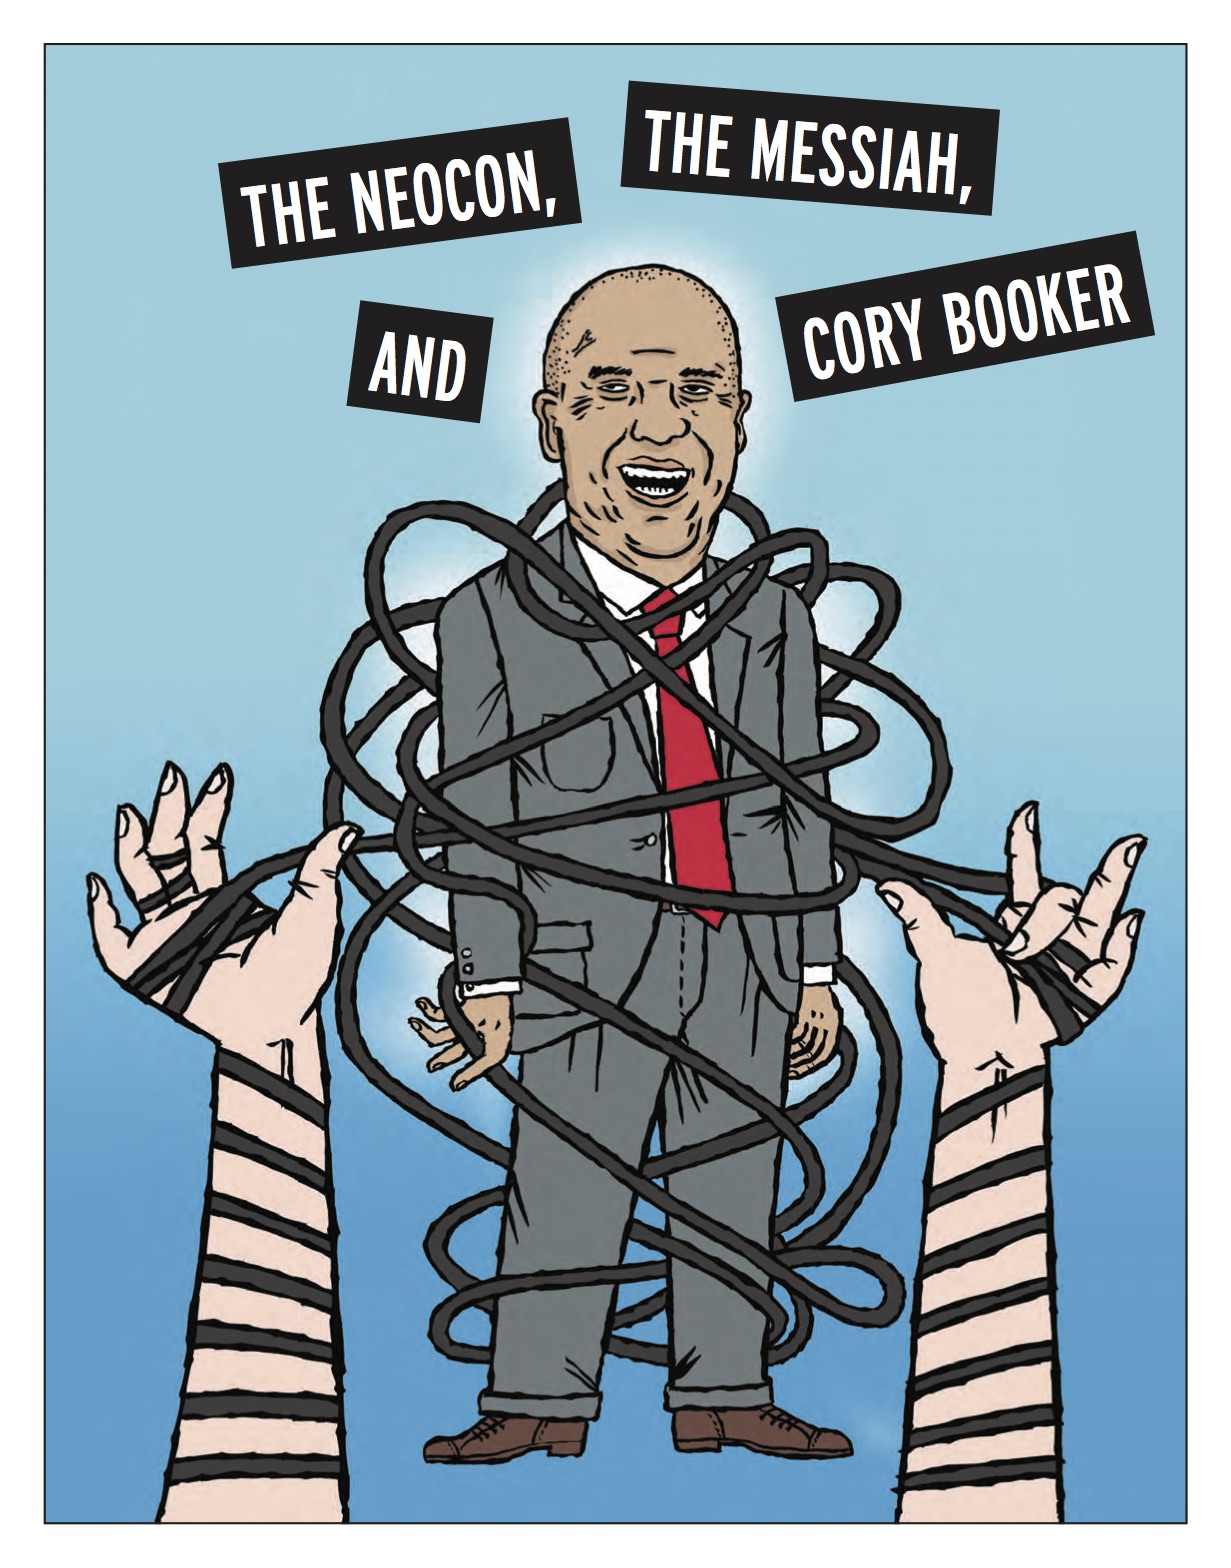 cory-booker-chabad-neocons-by-yasha-levine-nsfwcorp-sept-2013